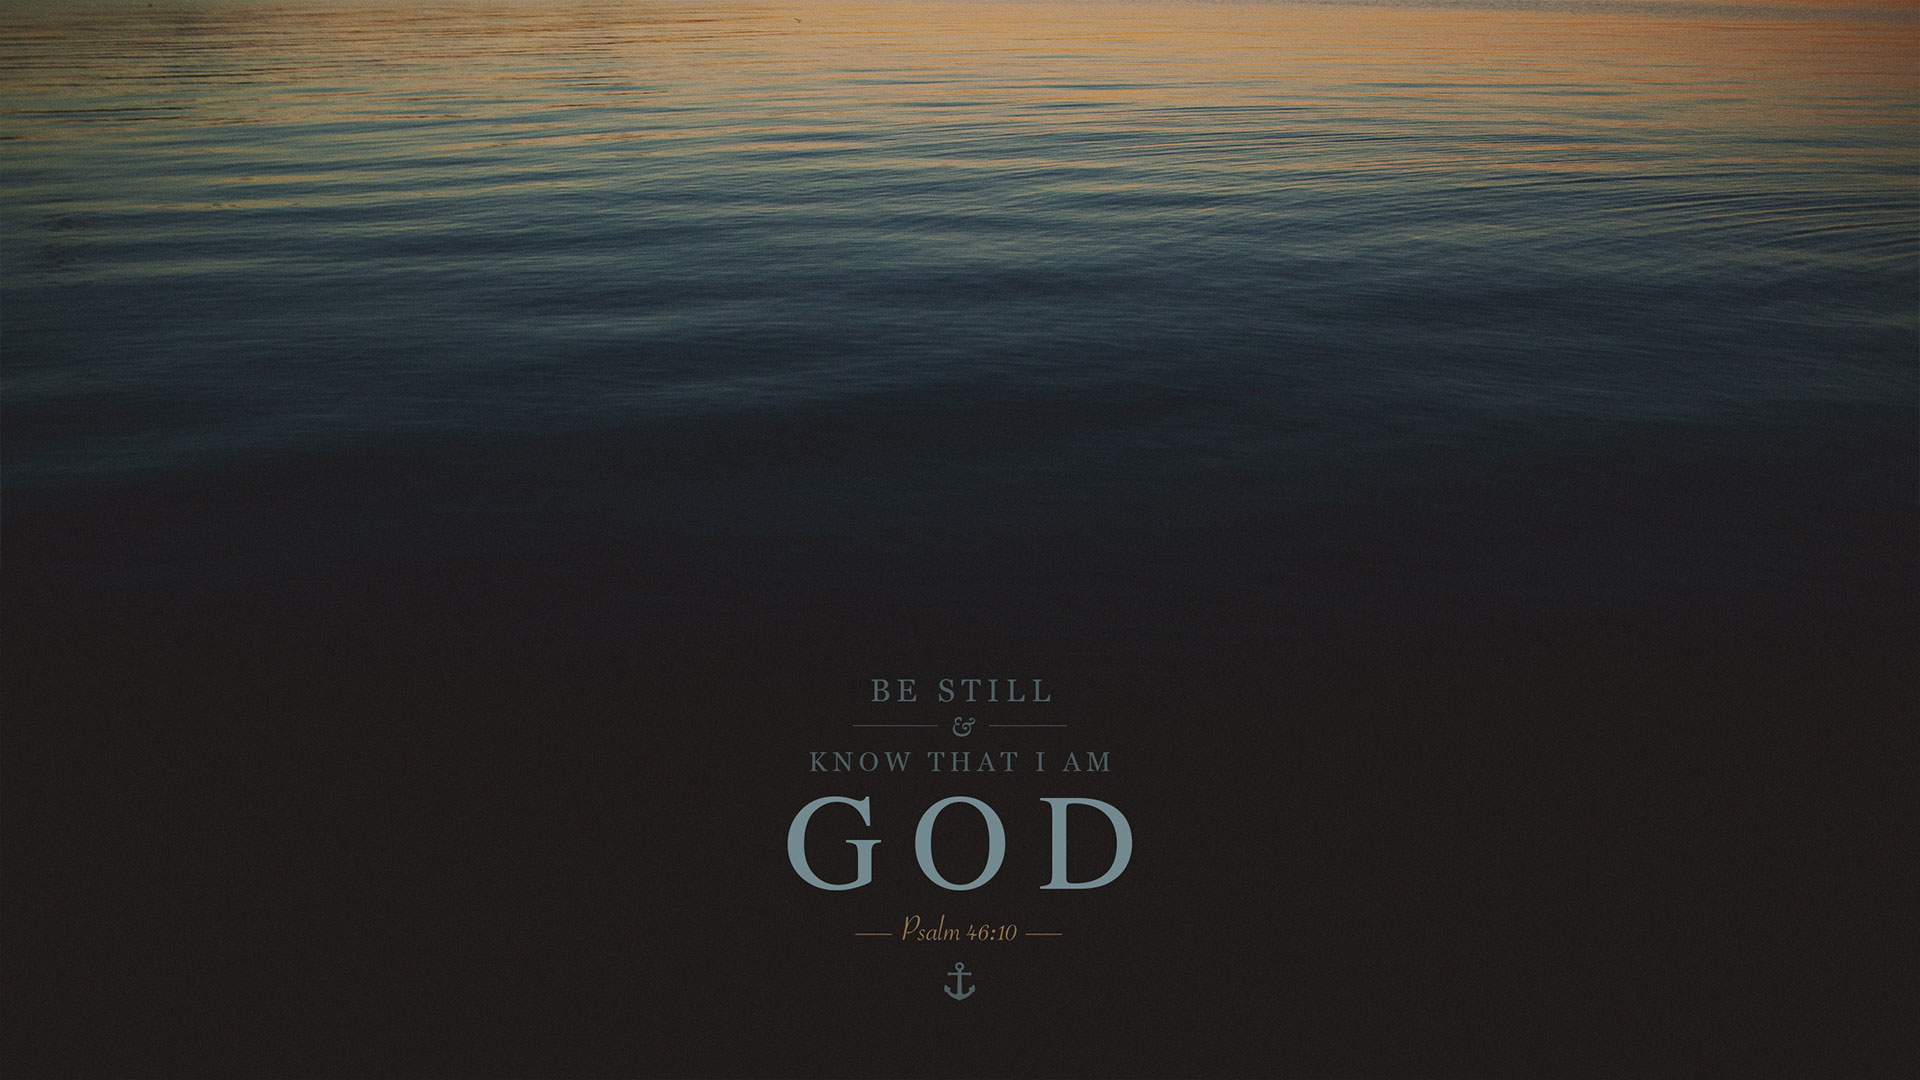 Wallpaper Be Still and Know That I Am God 1920x1080